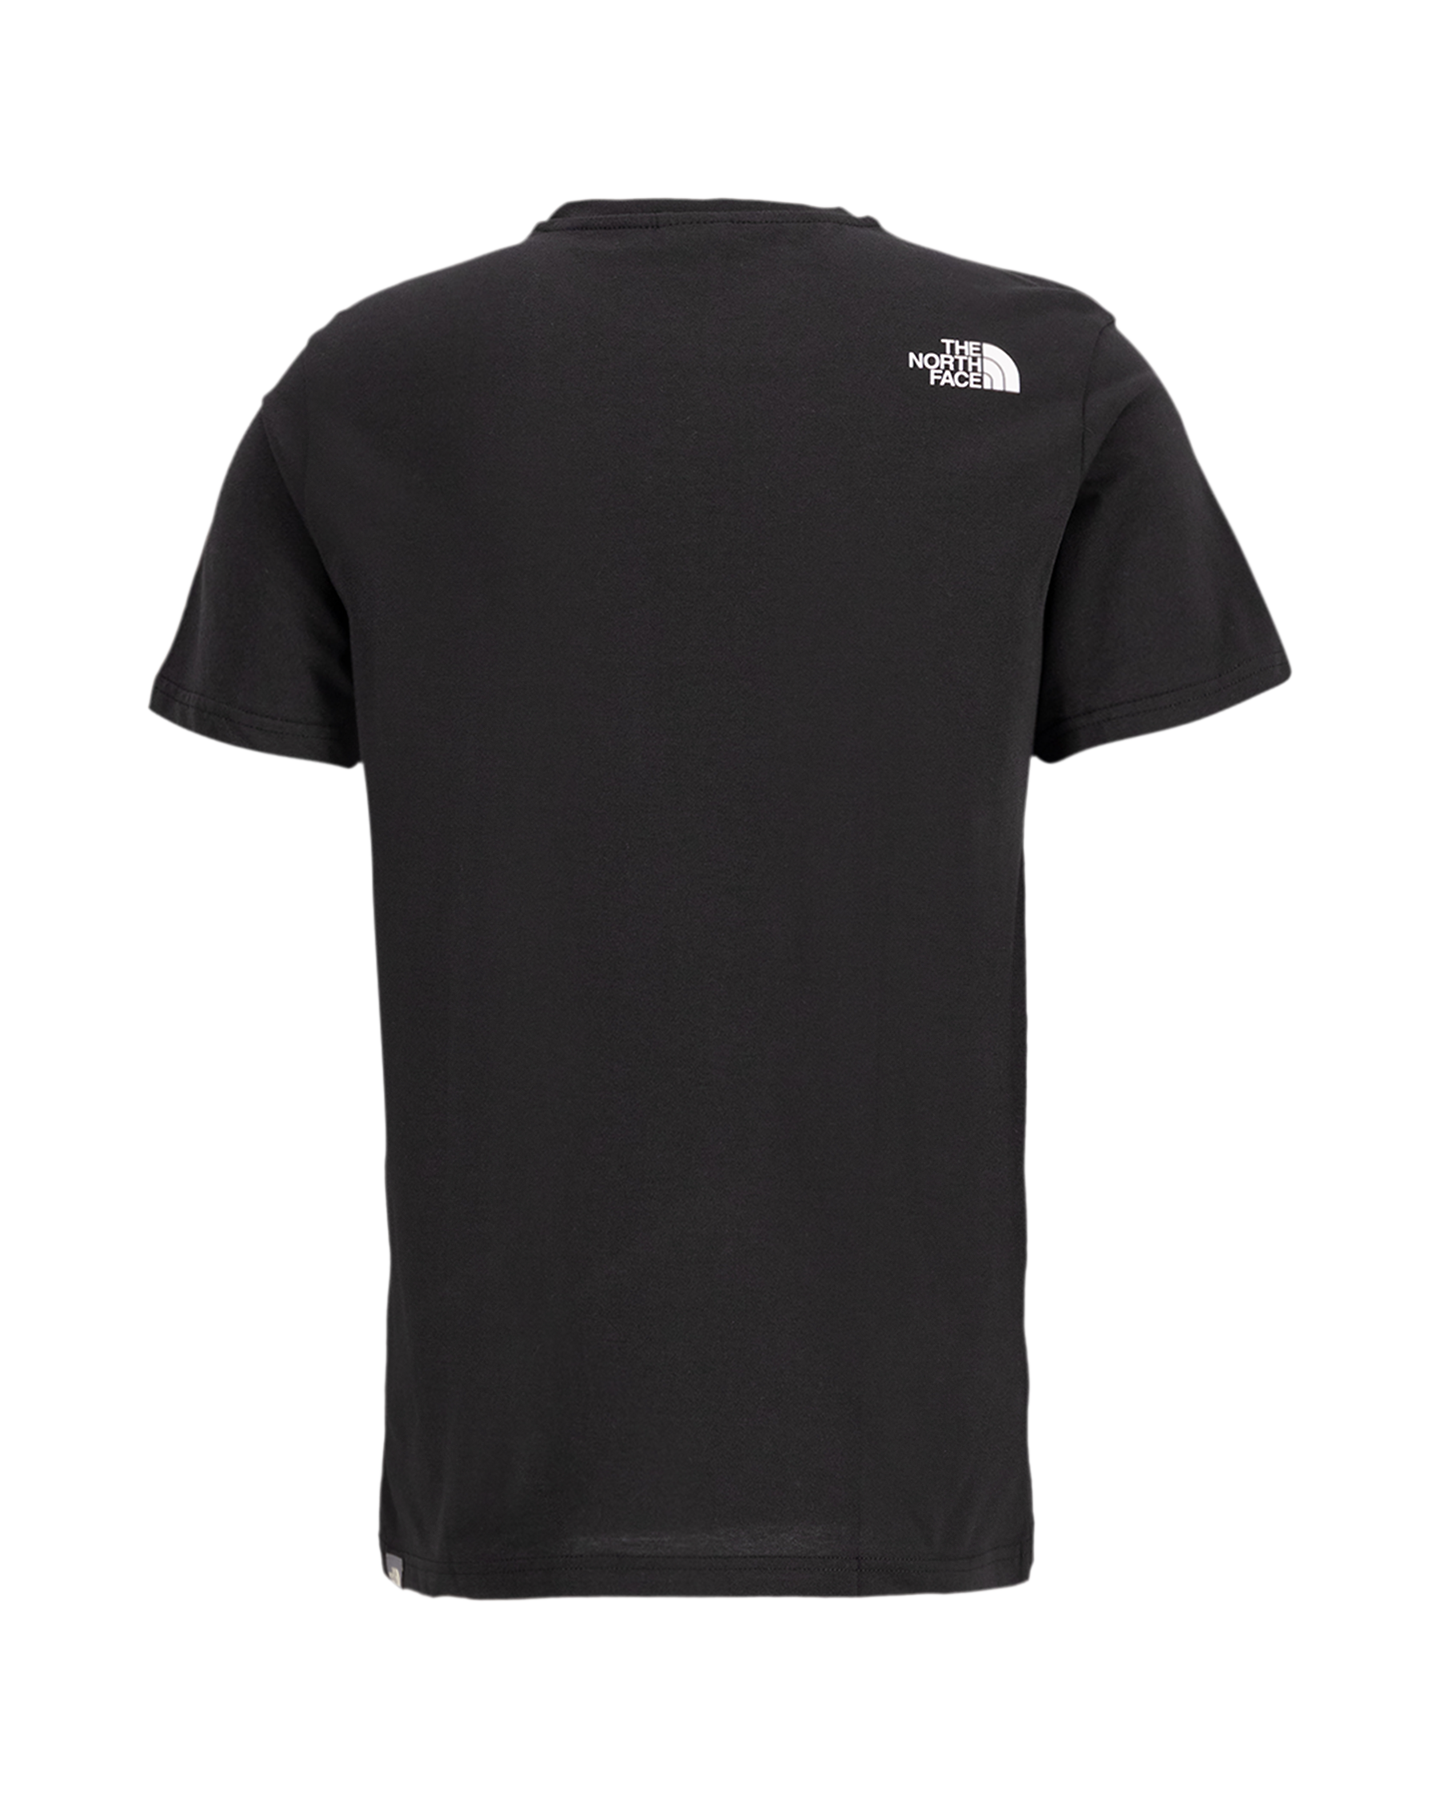 The North Face S/S Simple Dome Tee ZWART 1